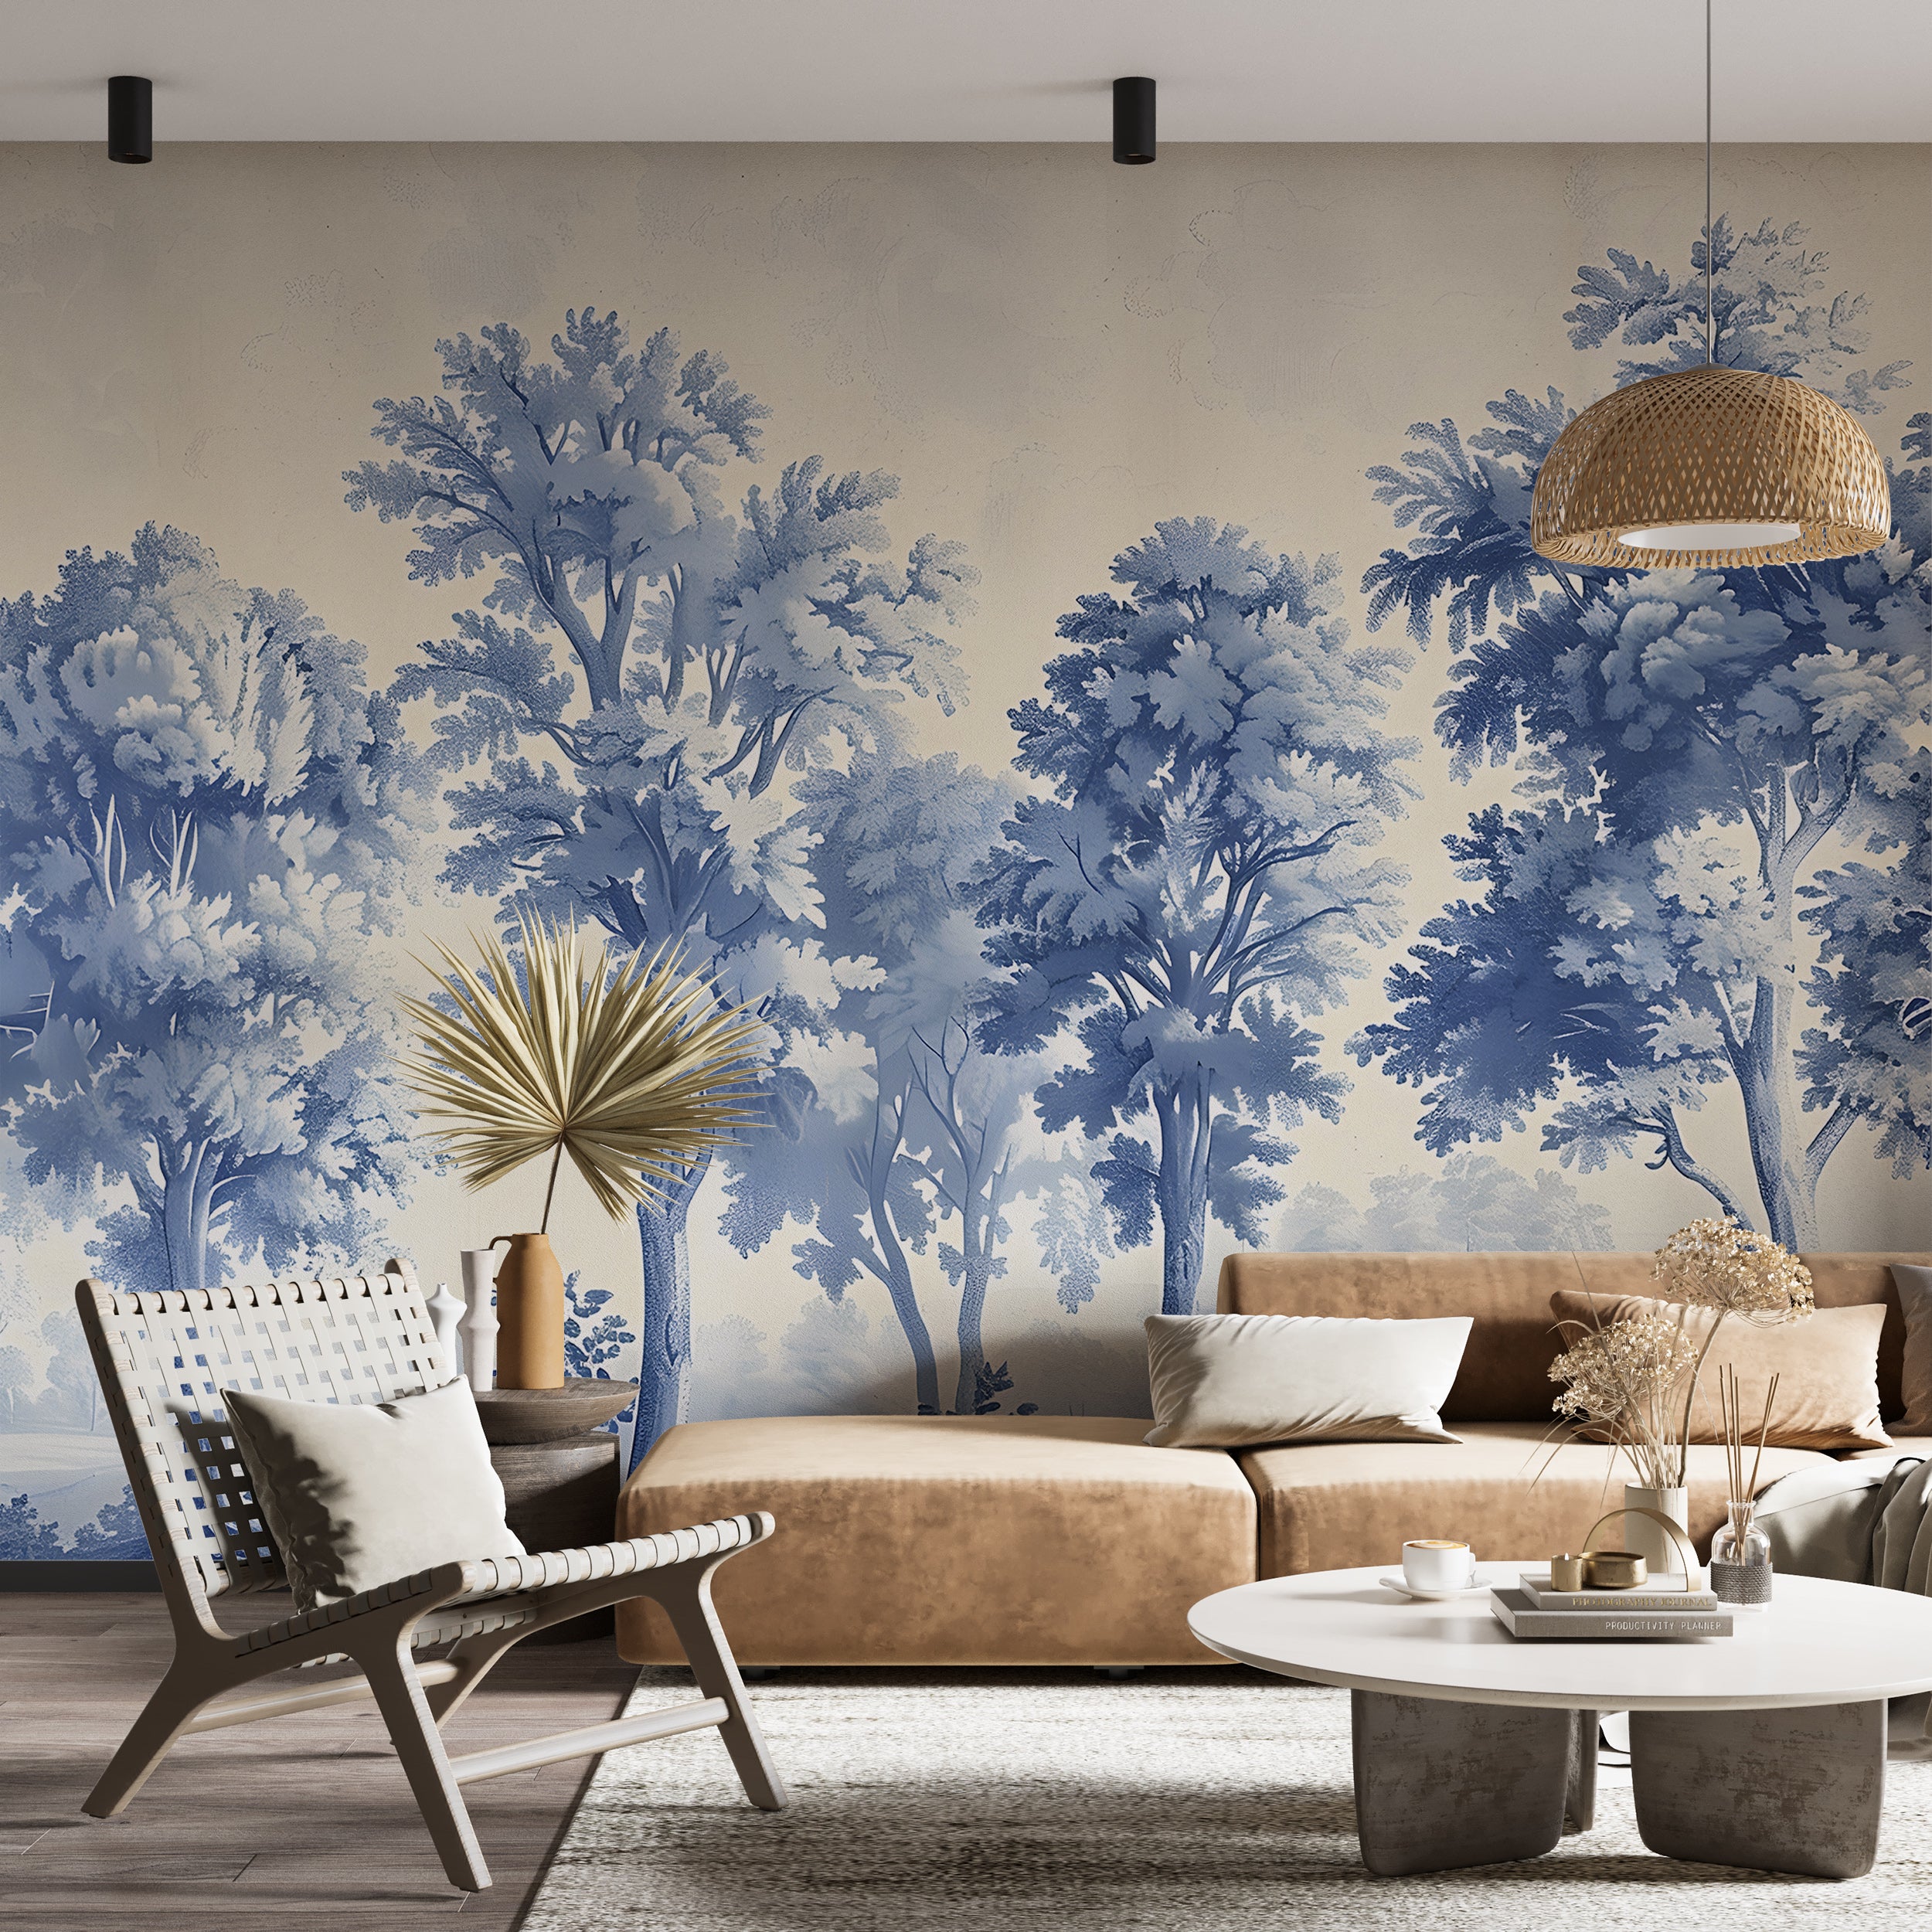 Blue Monochrome Trees Toile de Jouy Wallpaper Traditional French Landscape Peel and Stick Mural